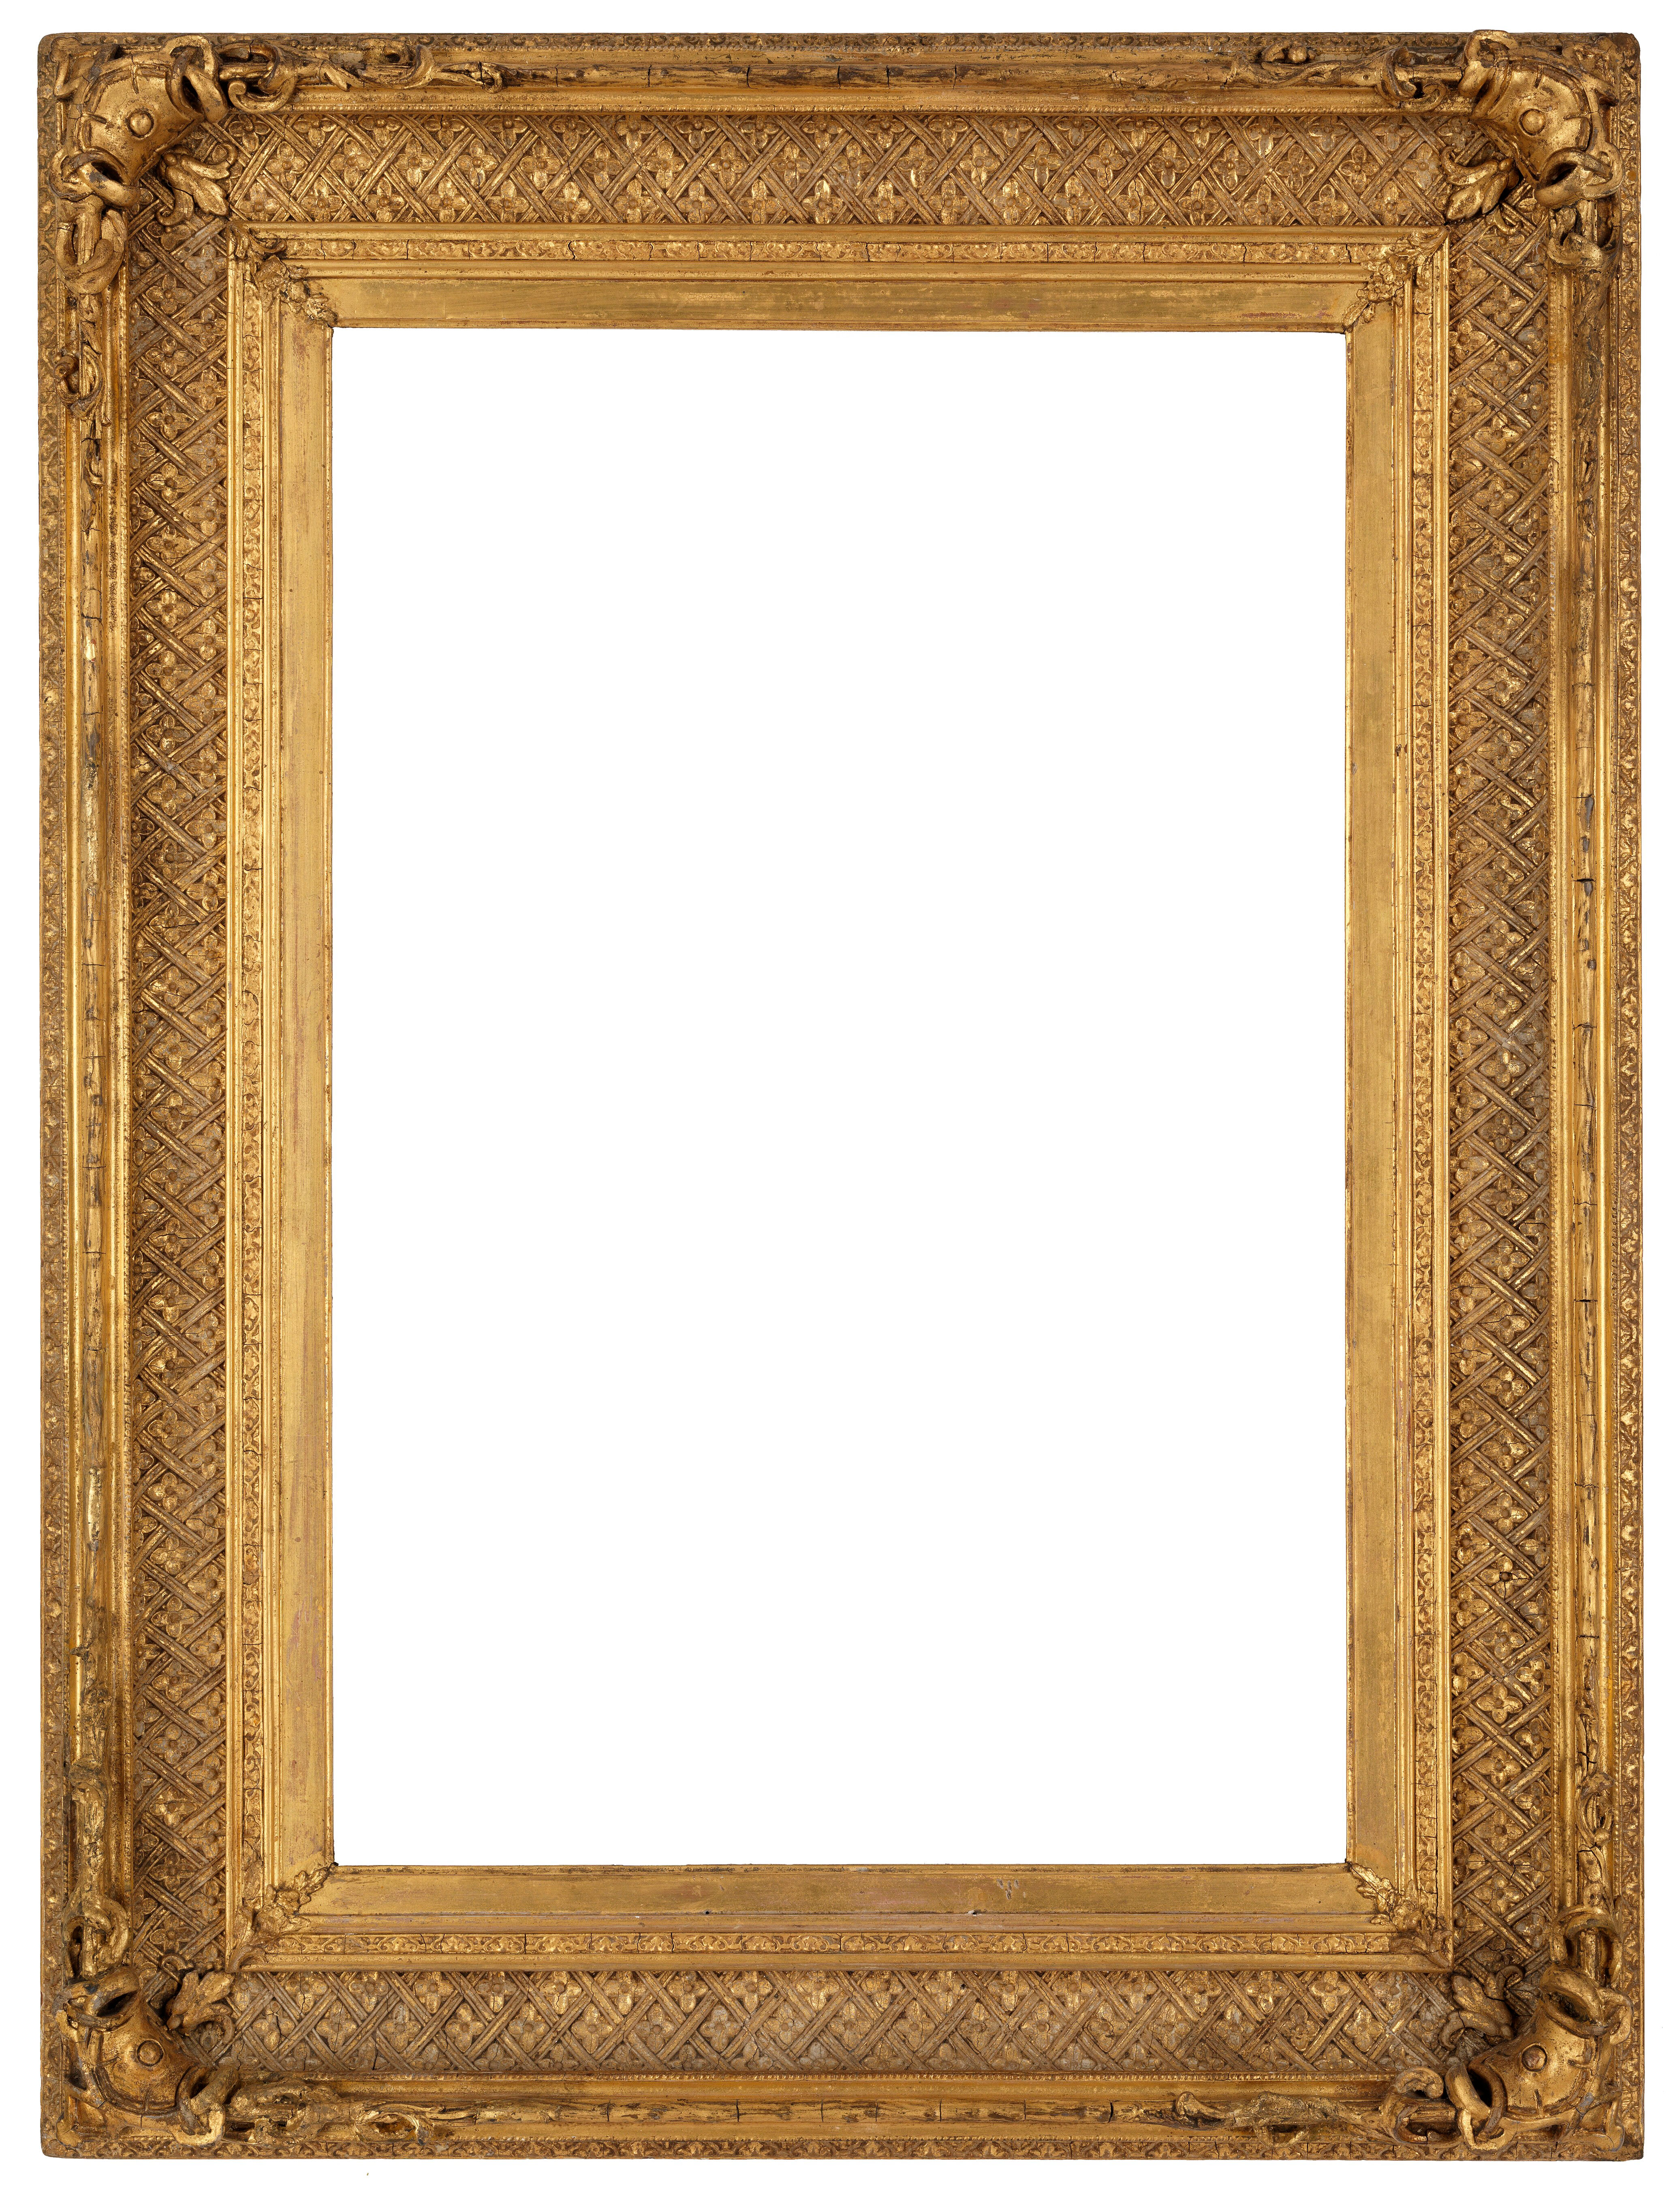 Oil painting frame  Wellcome Collection